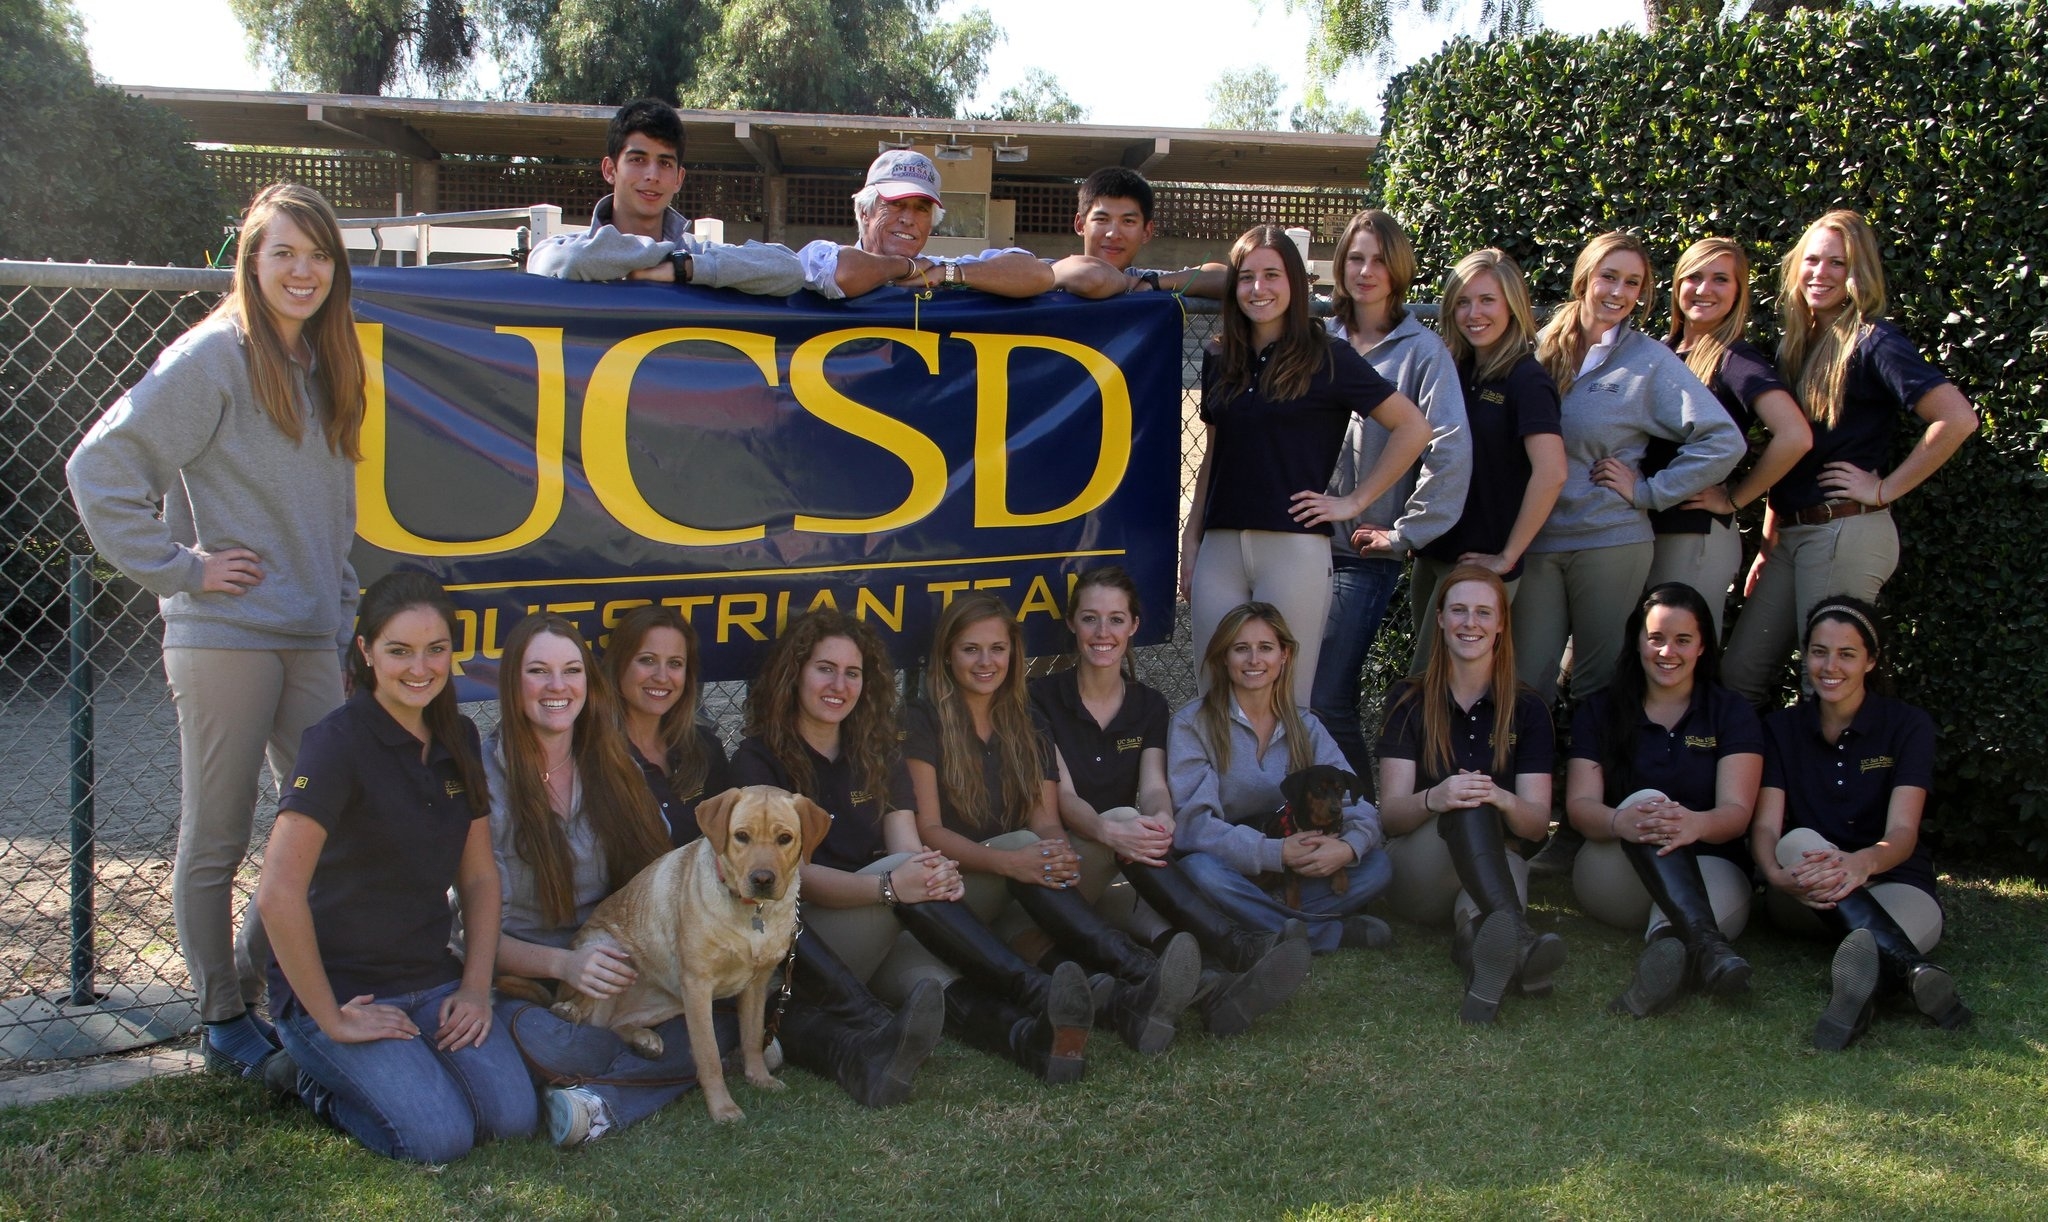 equestrian team picure with two cute puppy